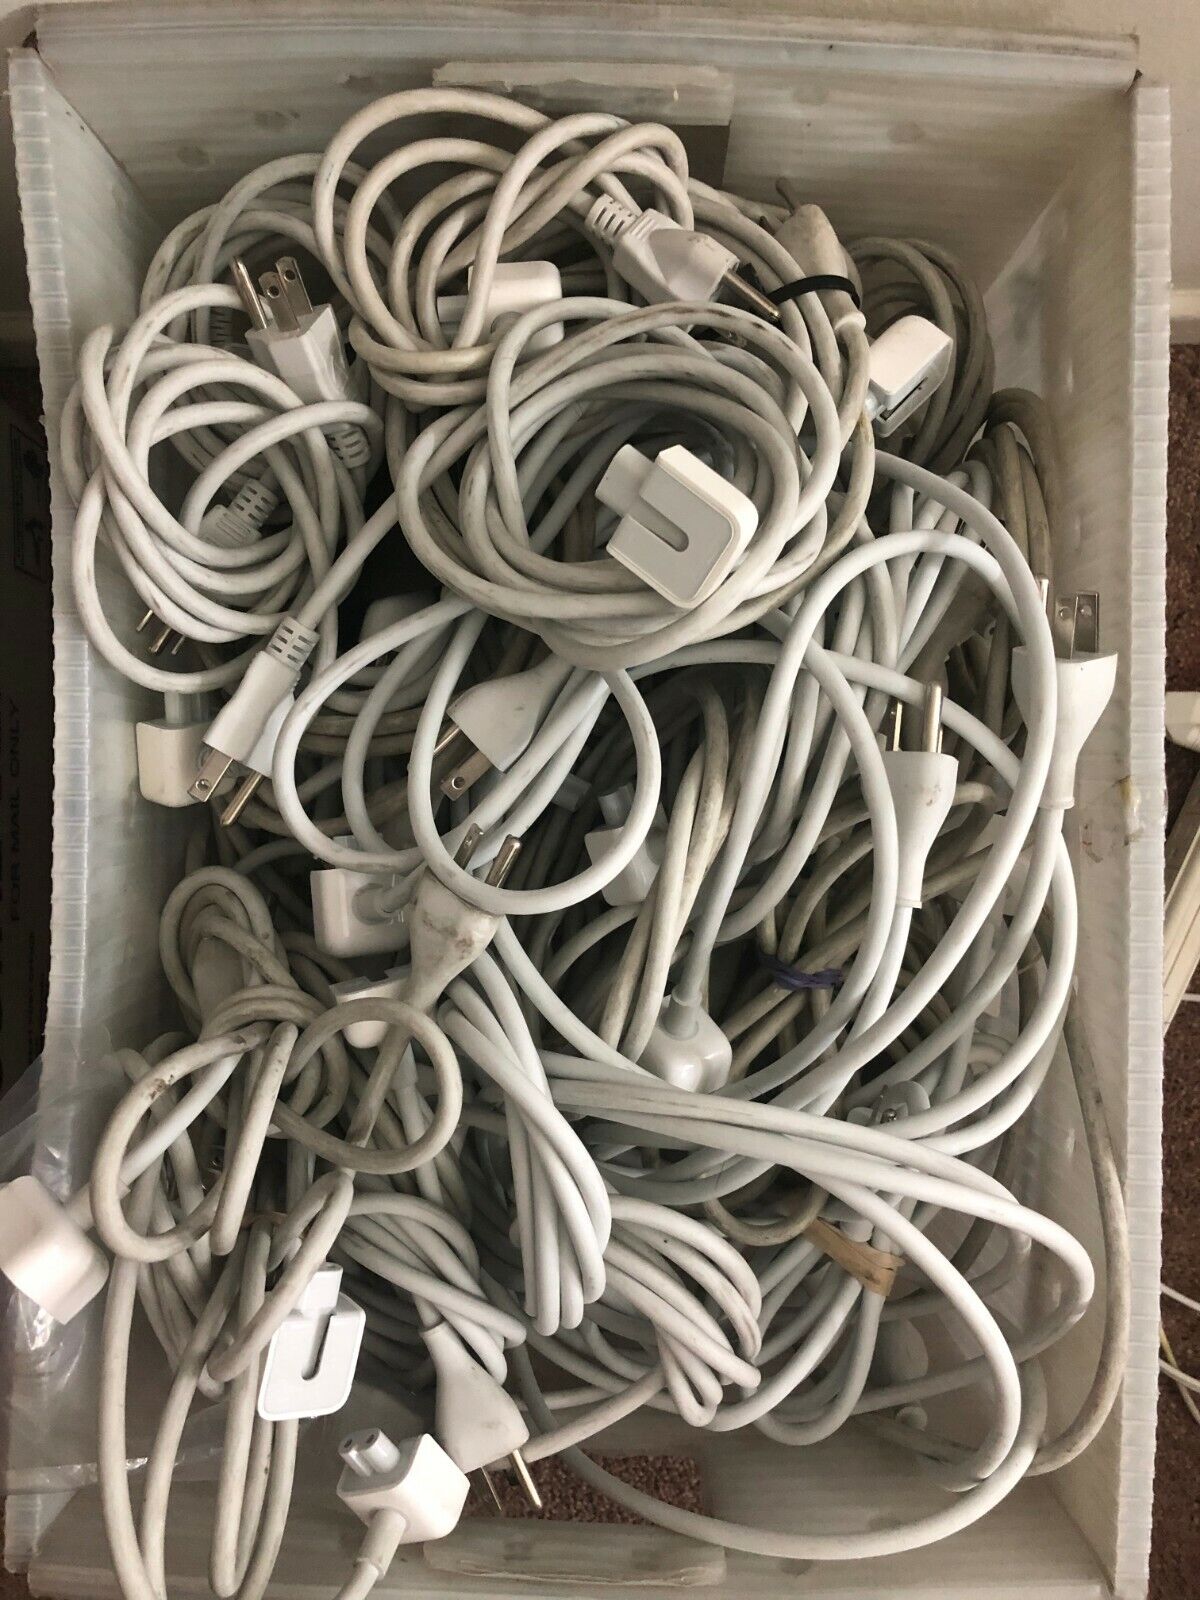 Lot of 15 Pieces charger cable \